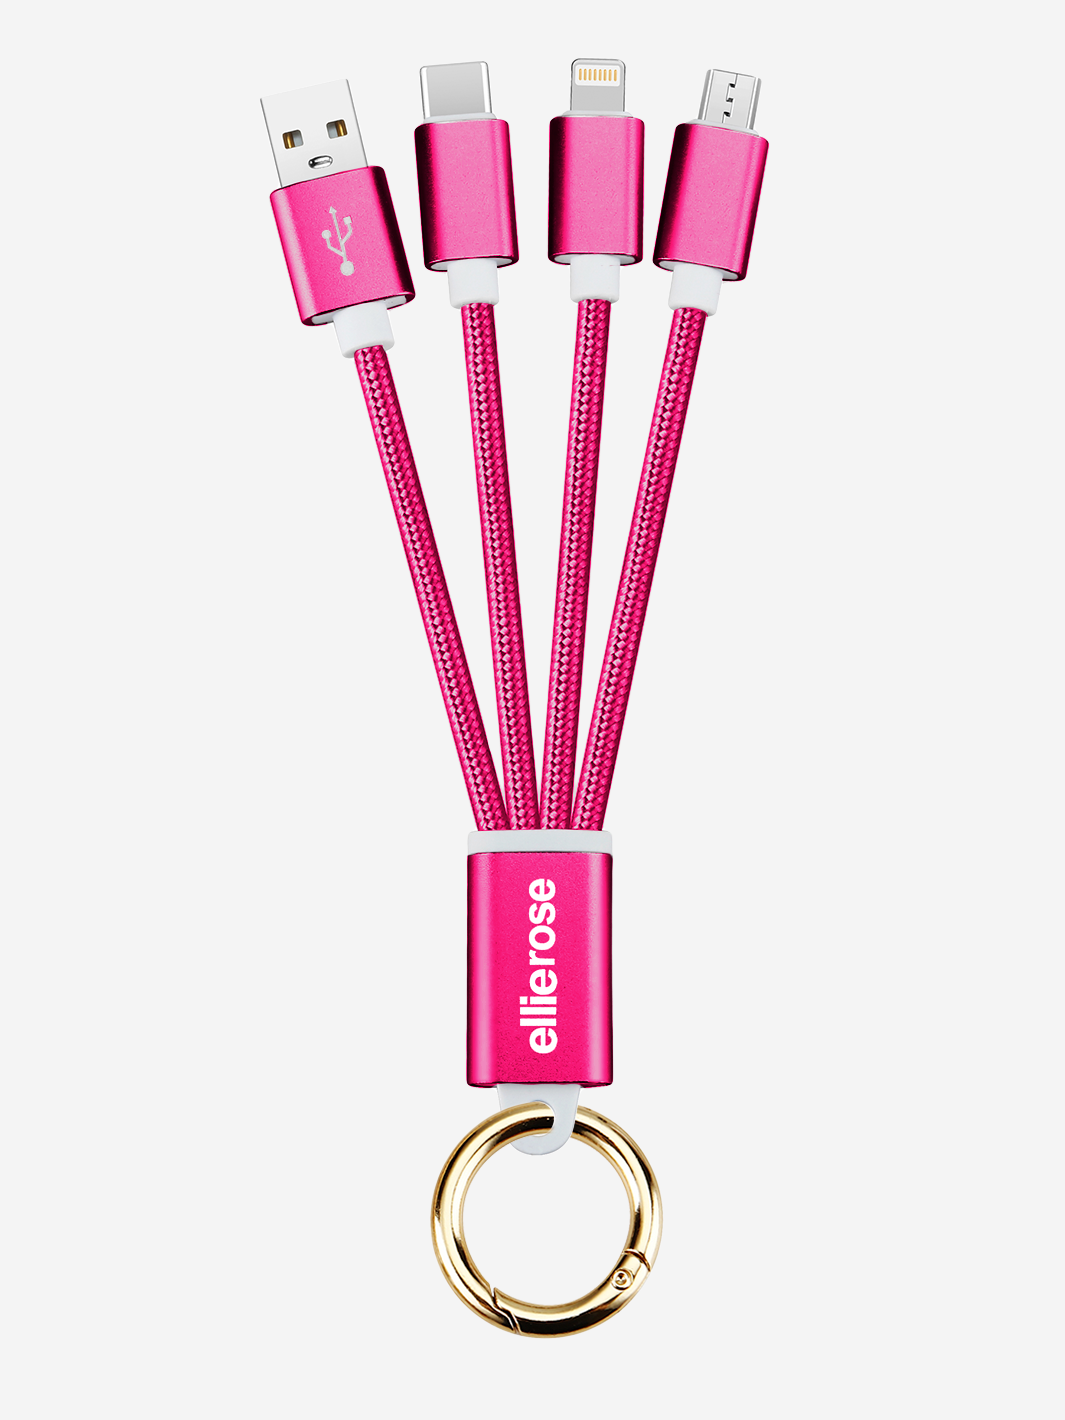 Hot Pink 3-in-1 Charging Cable Keychain